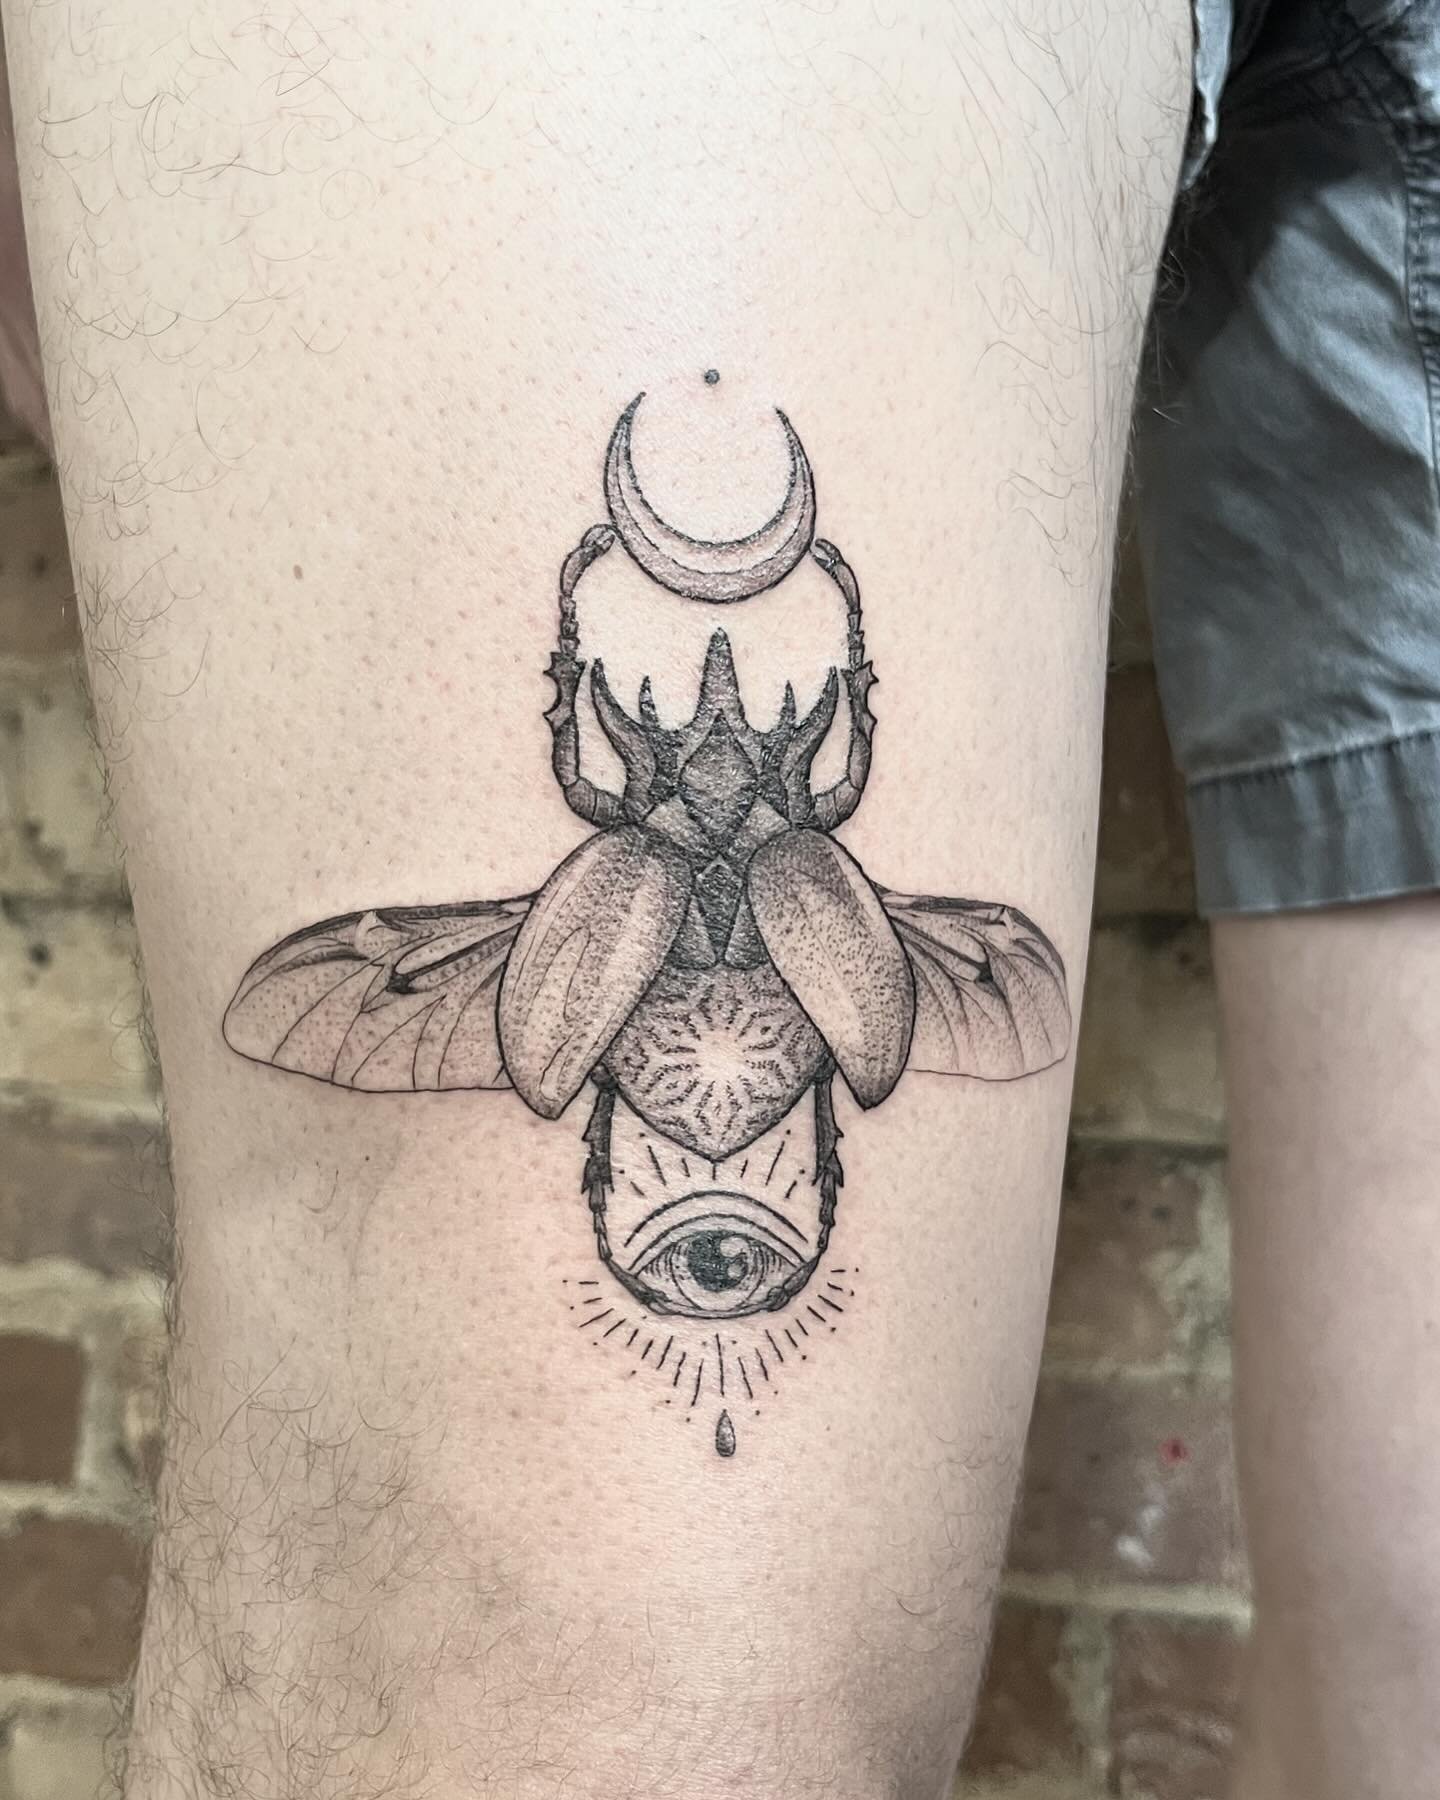 Absolutely loved creating this scarab beetle for Mark and the great chats! 
Thanks Mark. 
&bull;
&bull;
&bull;
&bull;
&bull;
#scarabbeetle #finelinetattooartist #jochastney #geometrictattoos #thightattoo #uktattoo #naturetattoo